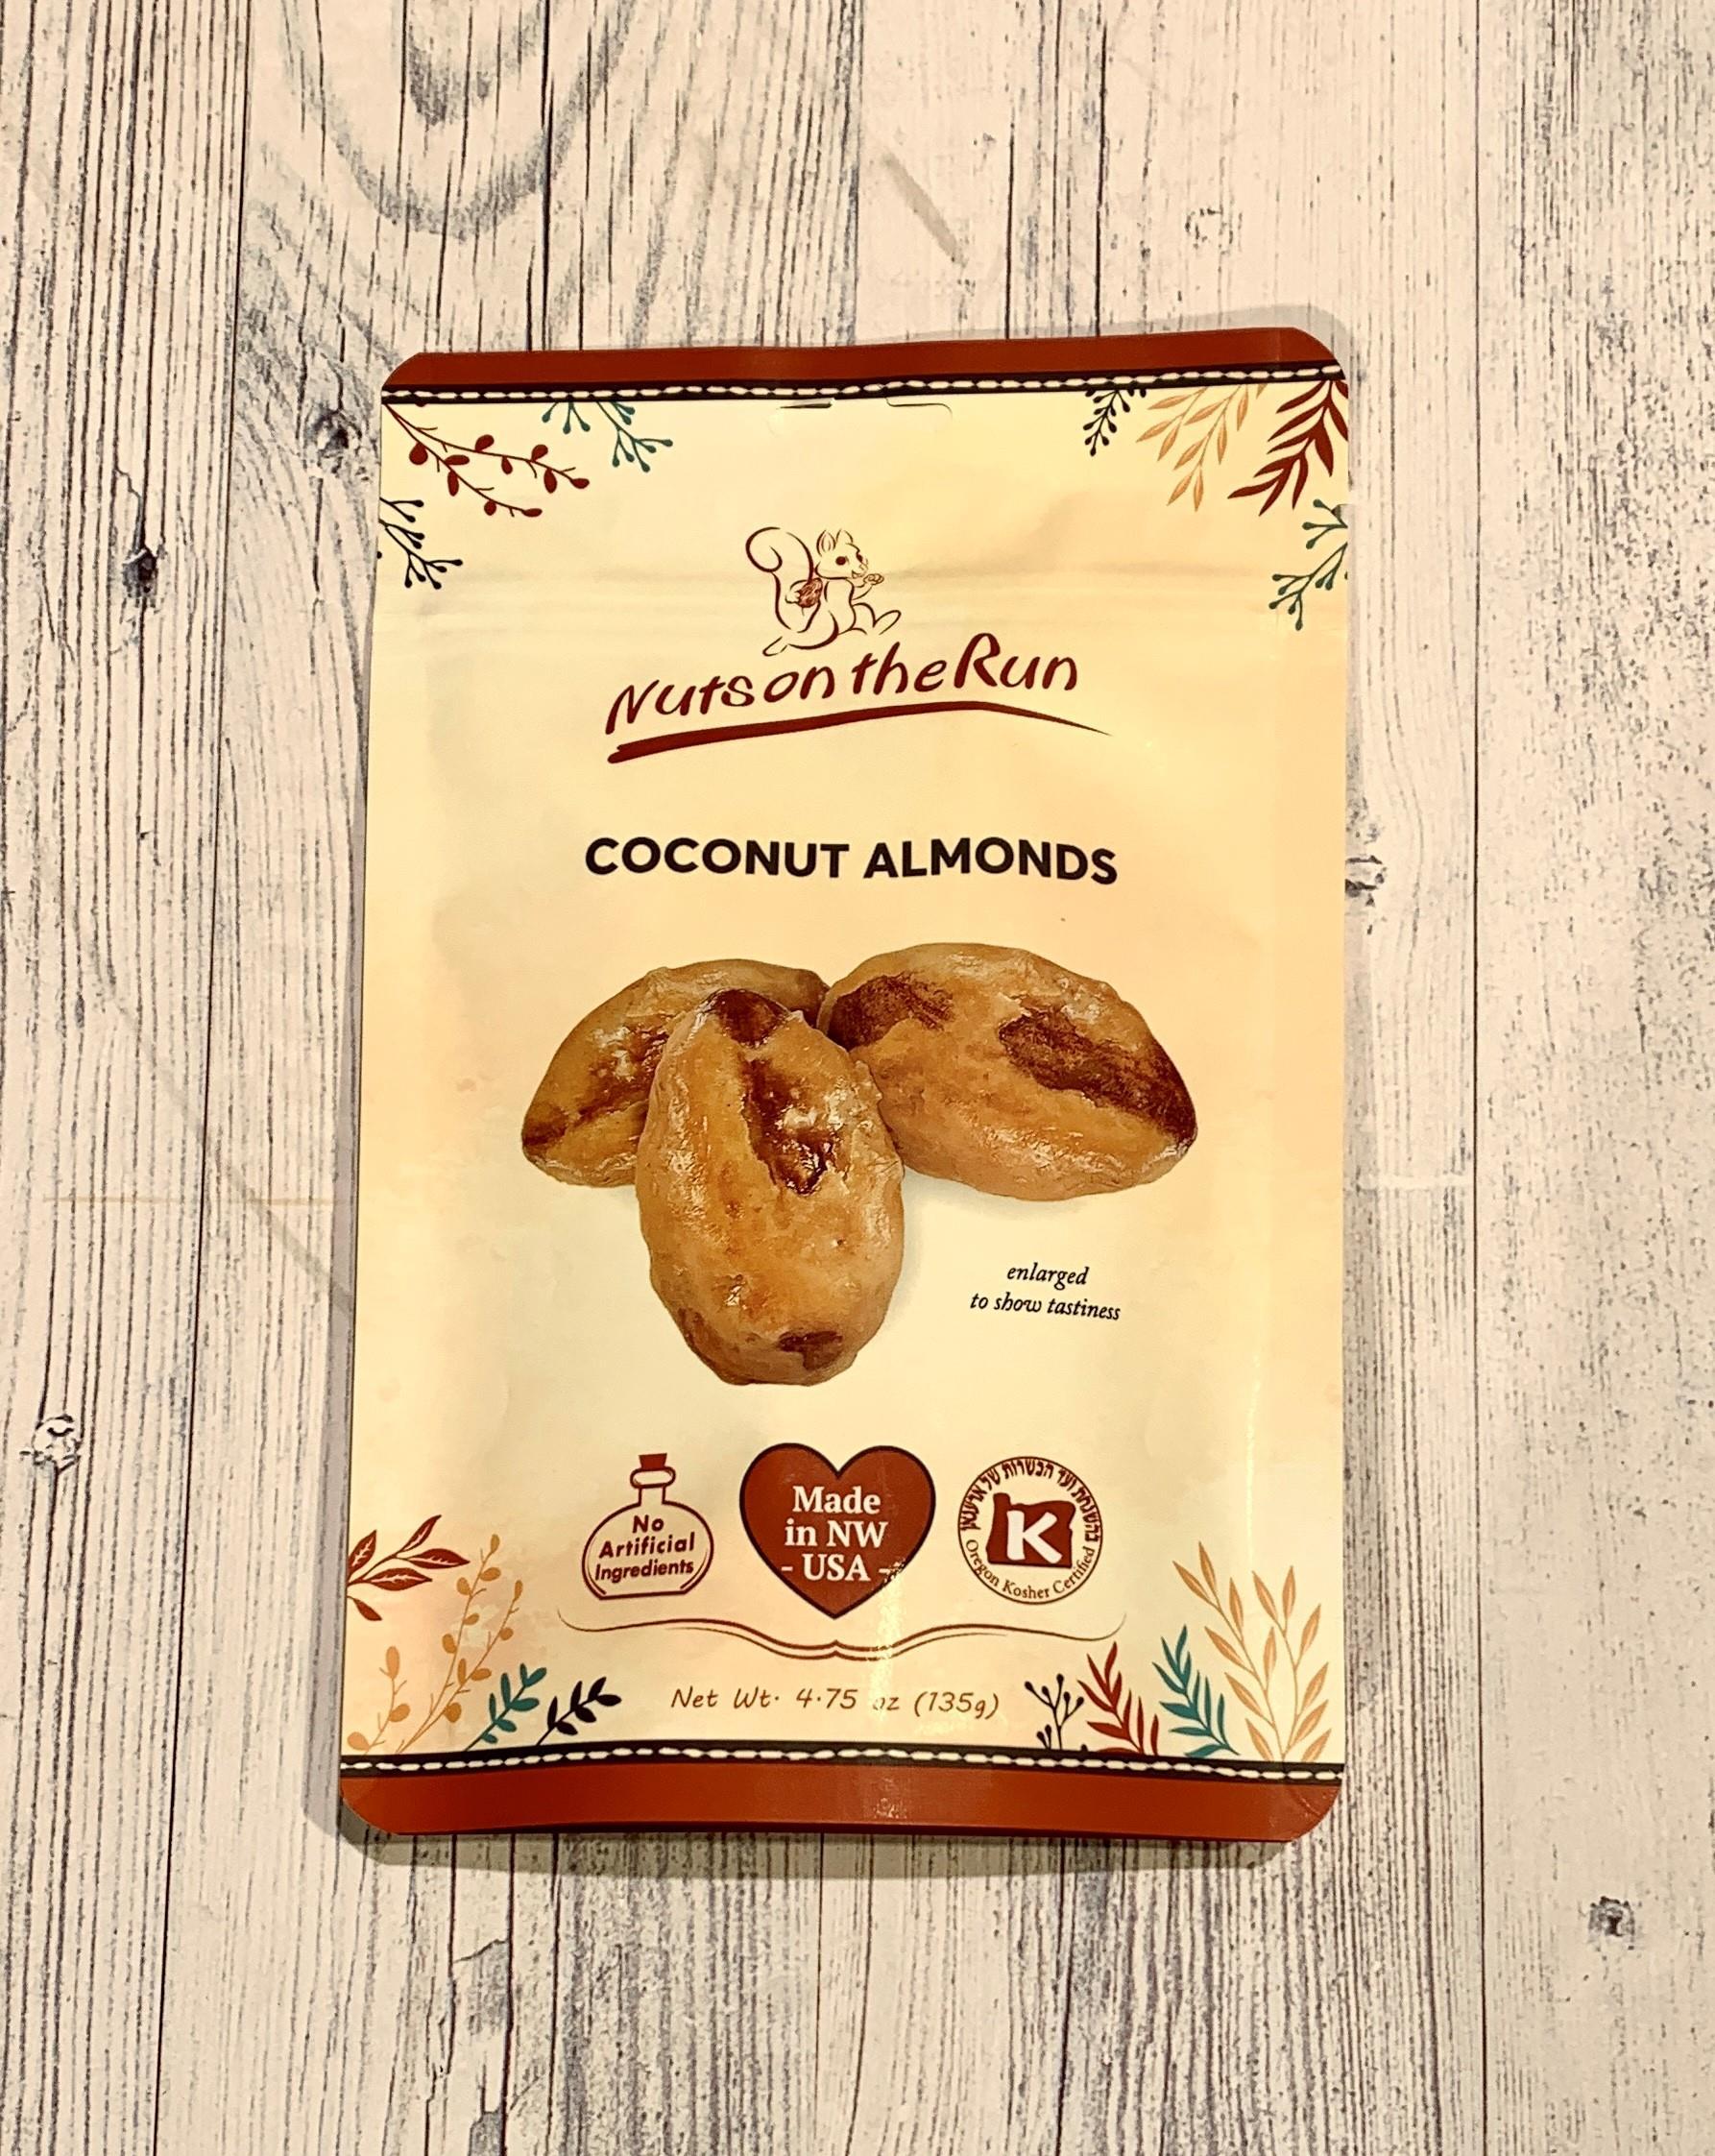 Nuts on the Run Coconut Almonds 4.75oz NWFG - Nuts on the Run